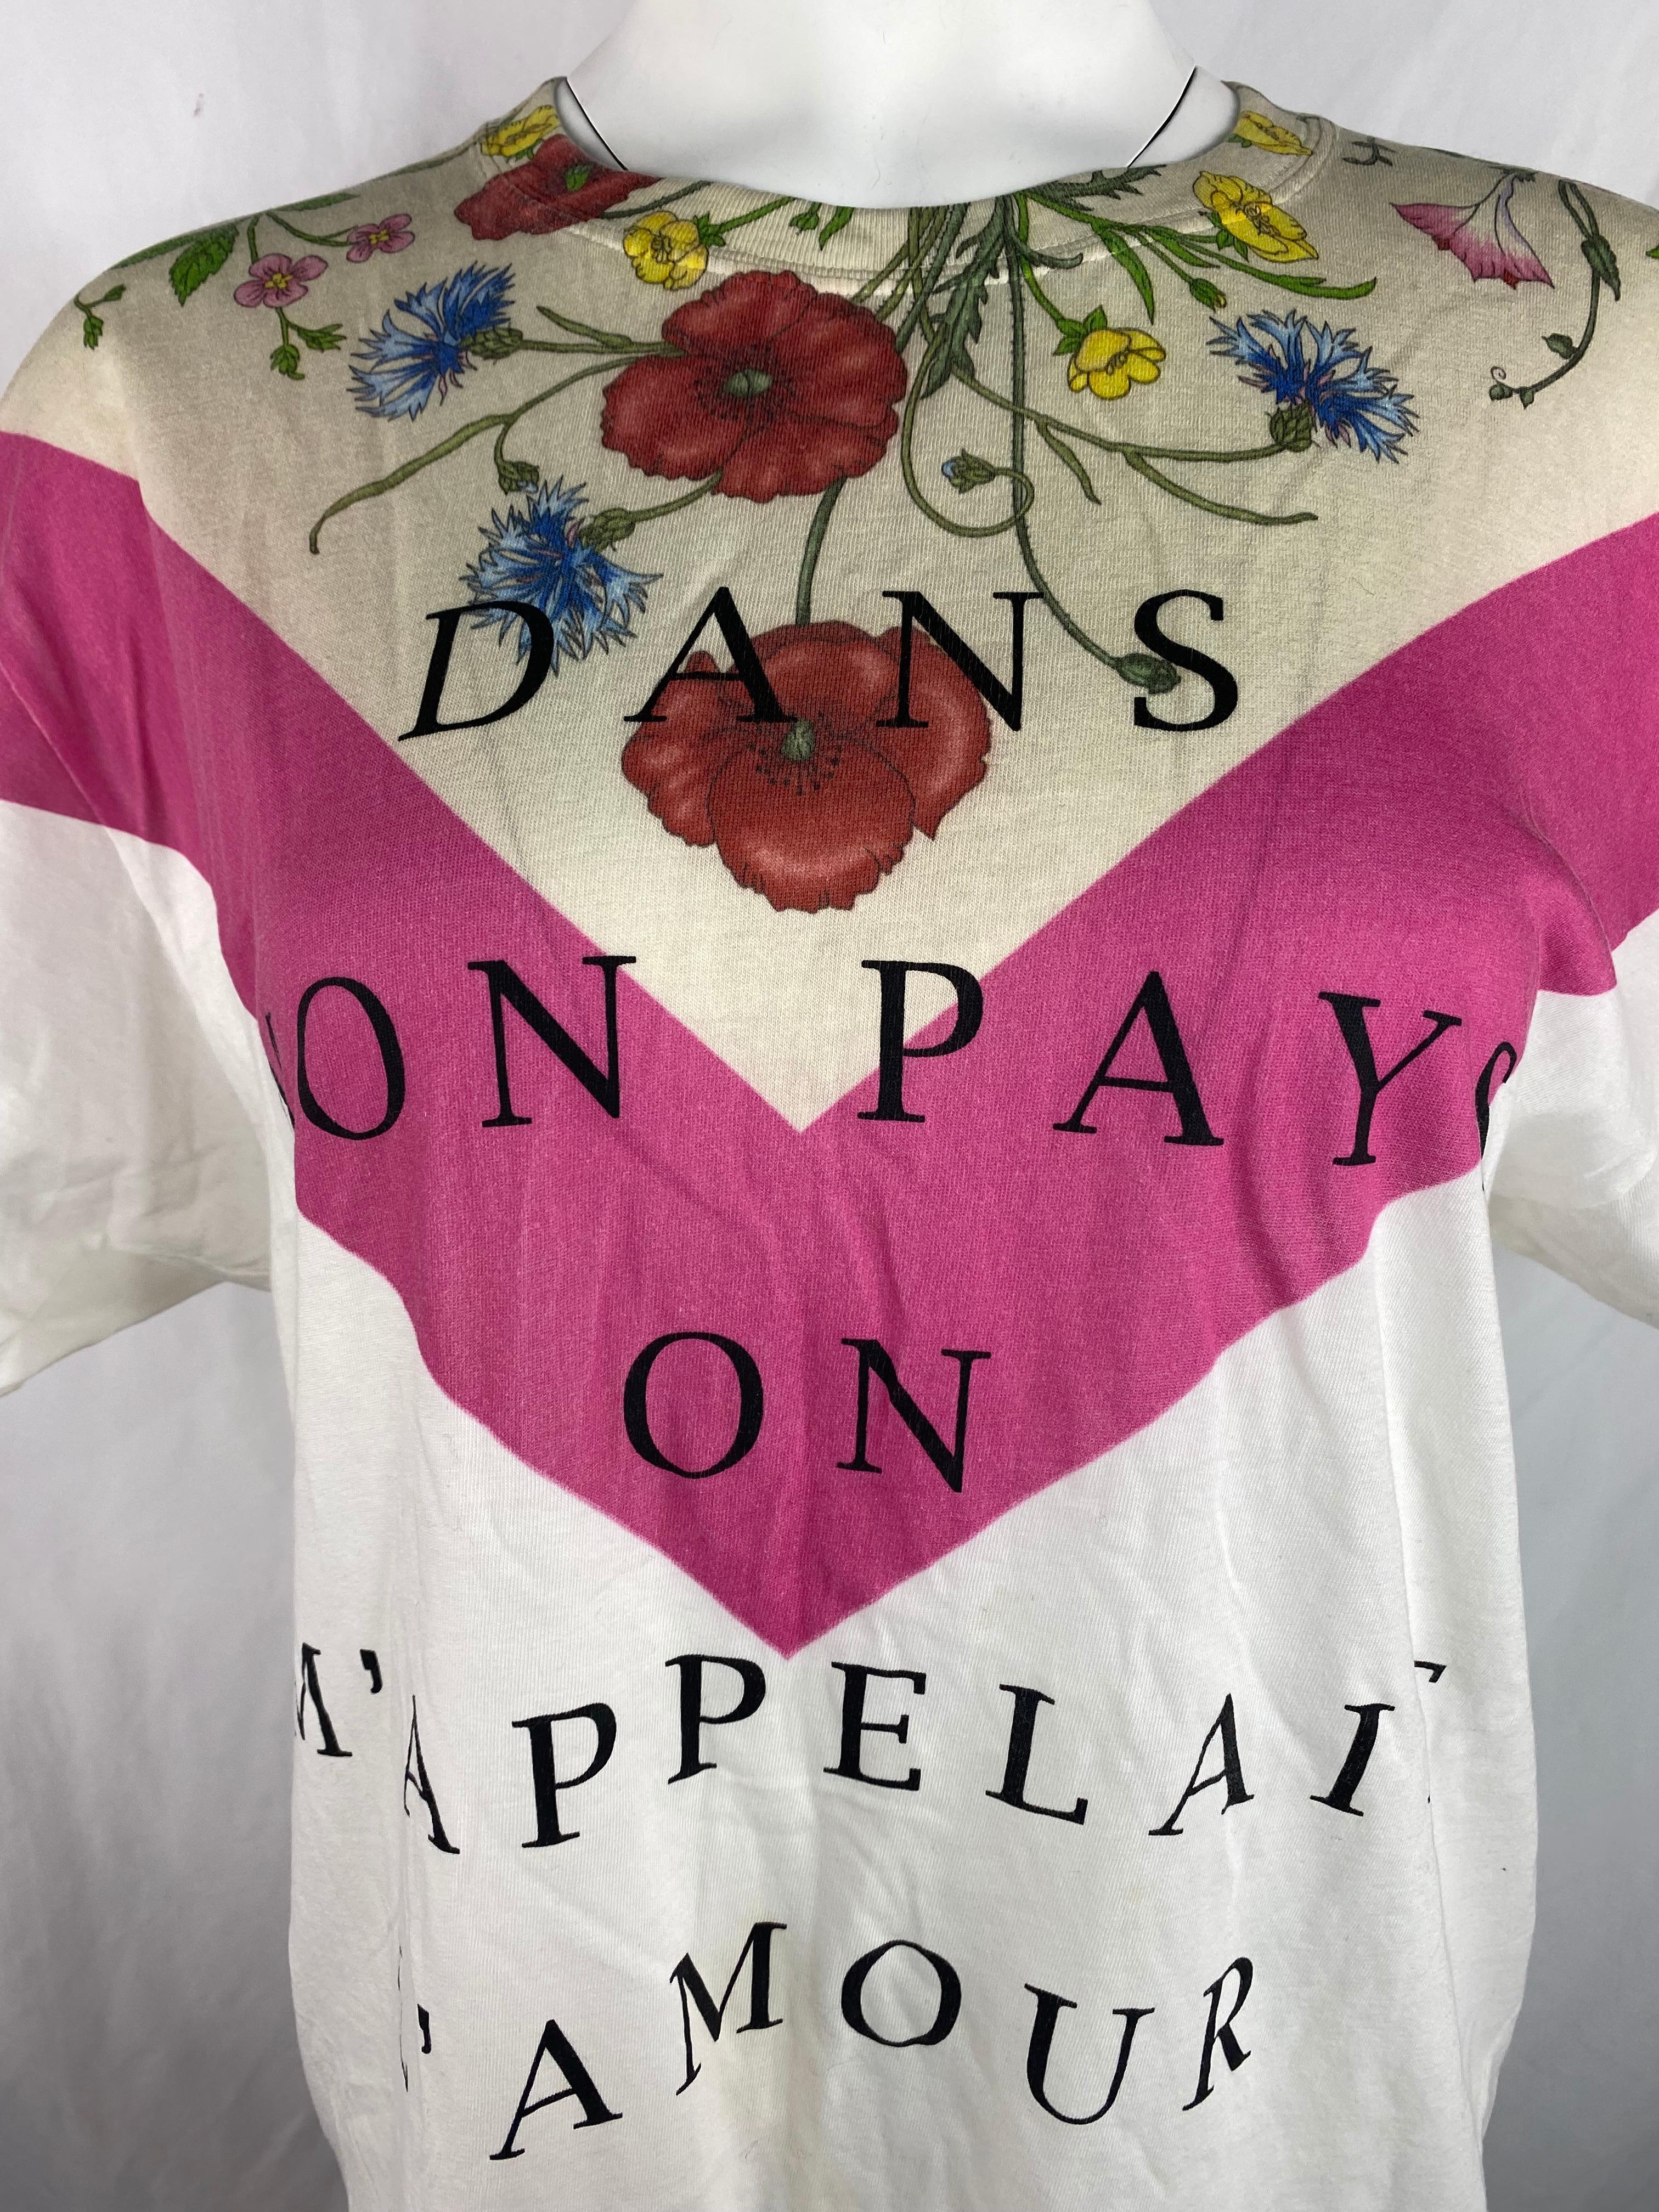 Product details:

The top features floral print on the front with Dans Mon Pays On M'Appelait L'Amour black print, crew neck line and short sleeves.